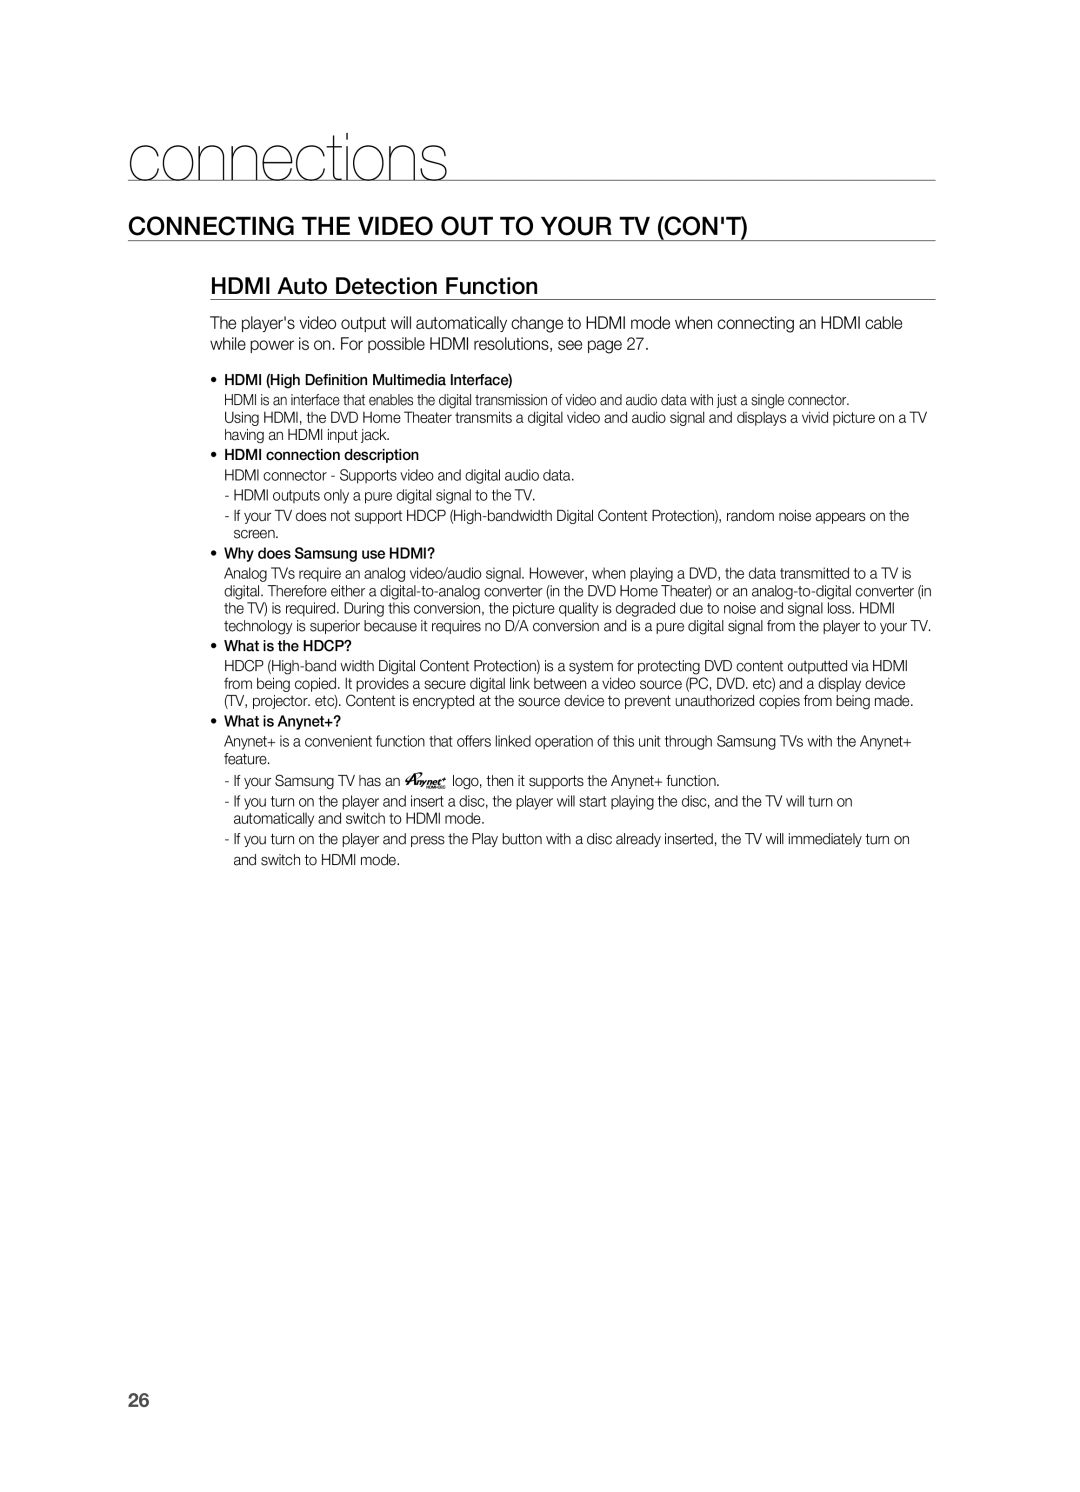 Samsung HT-TZ312, HT-Z310 manual Connecting the Video Out to your TV CONt, HDMI Auto Detection Function, connections 